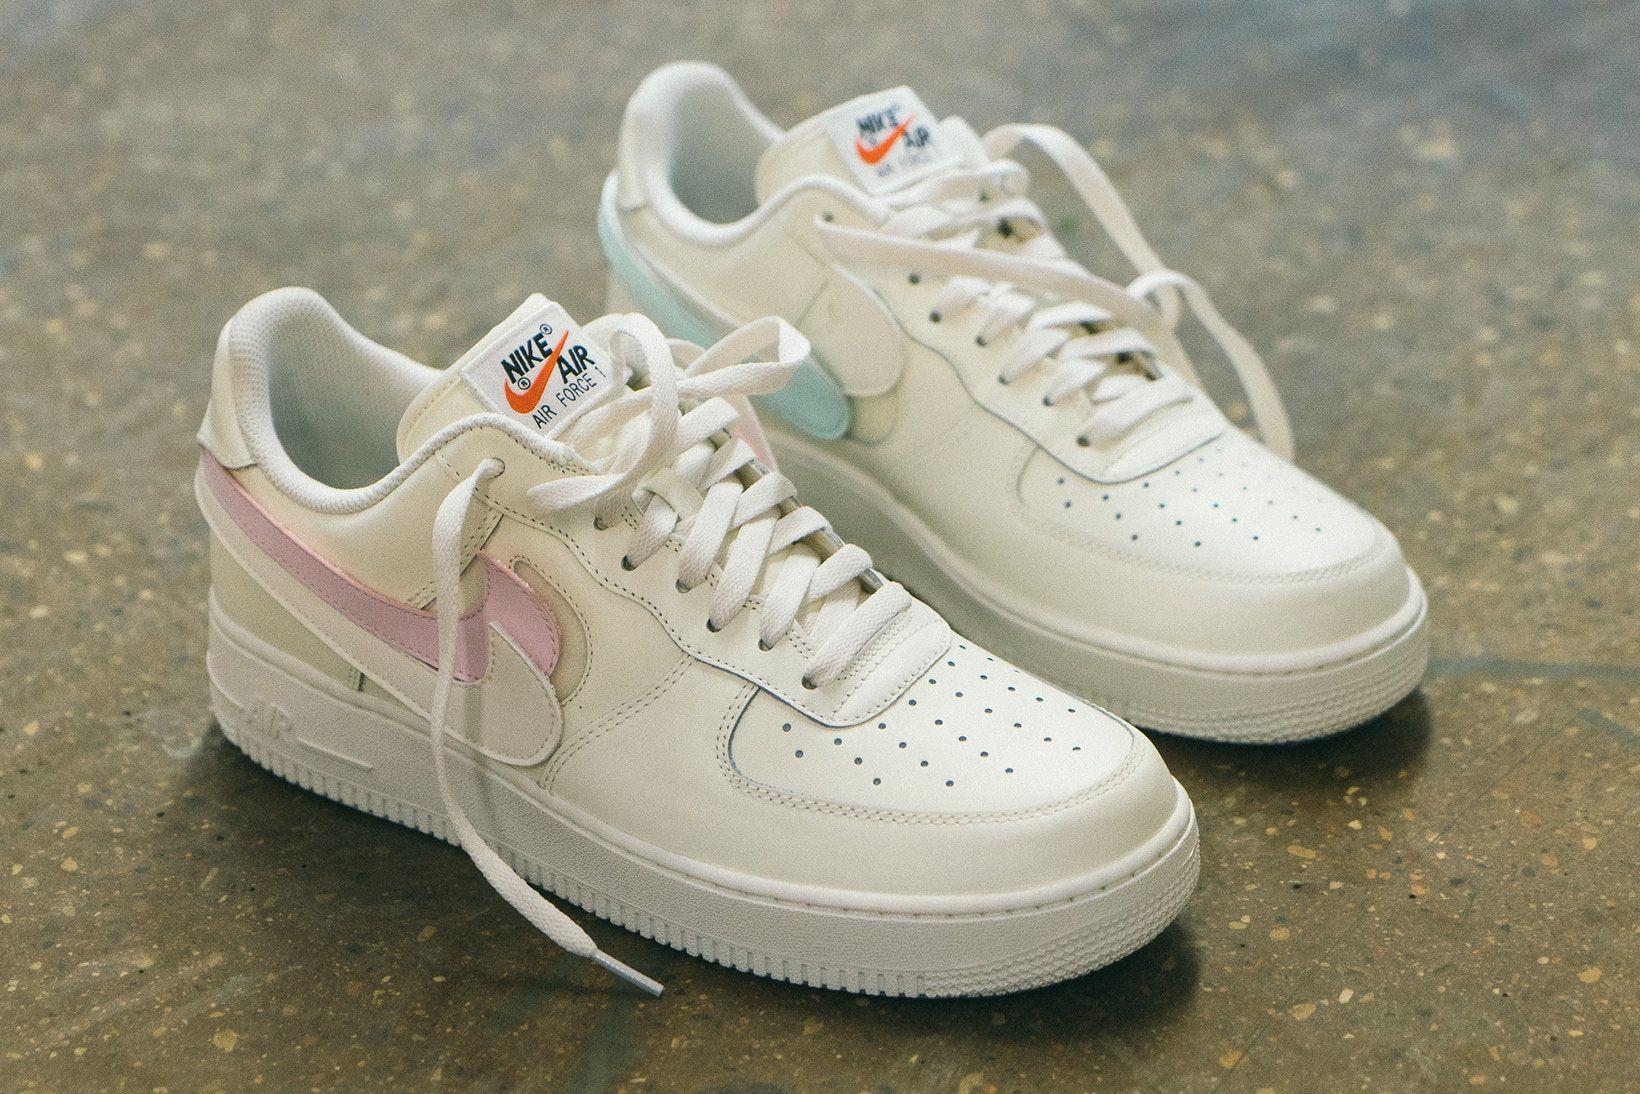 Pastel Nike Logo - Nike's Customisable Air Force 1 Is Launching With Pretty Pastel